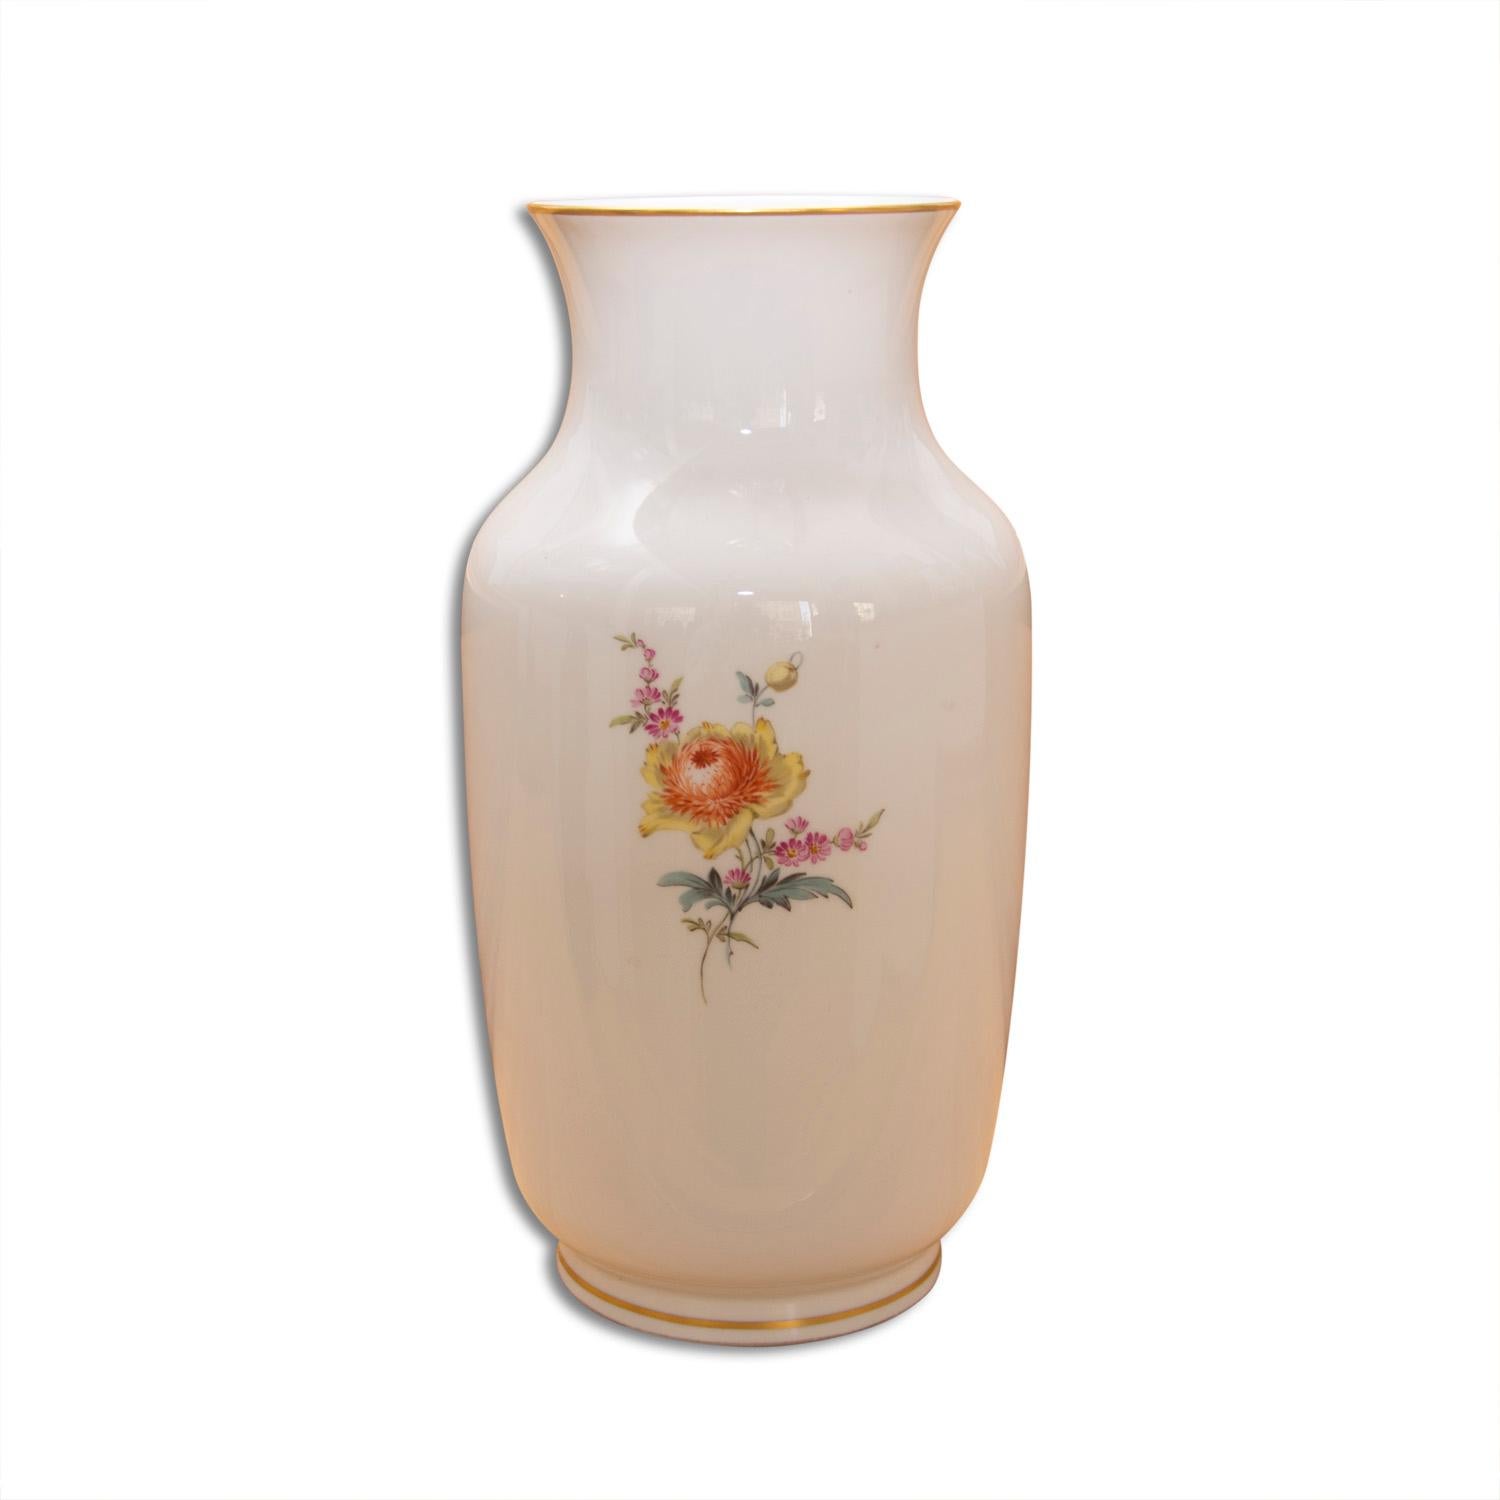 This porcelain vase was made by a world famous porcelain company in Meissen, Germany in the 1930´s. In very good Vintage condition without any damage.